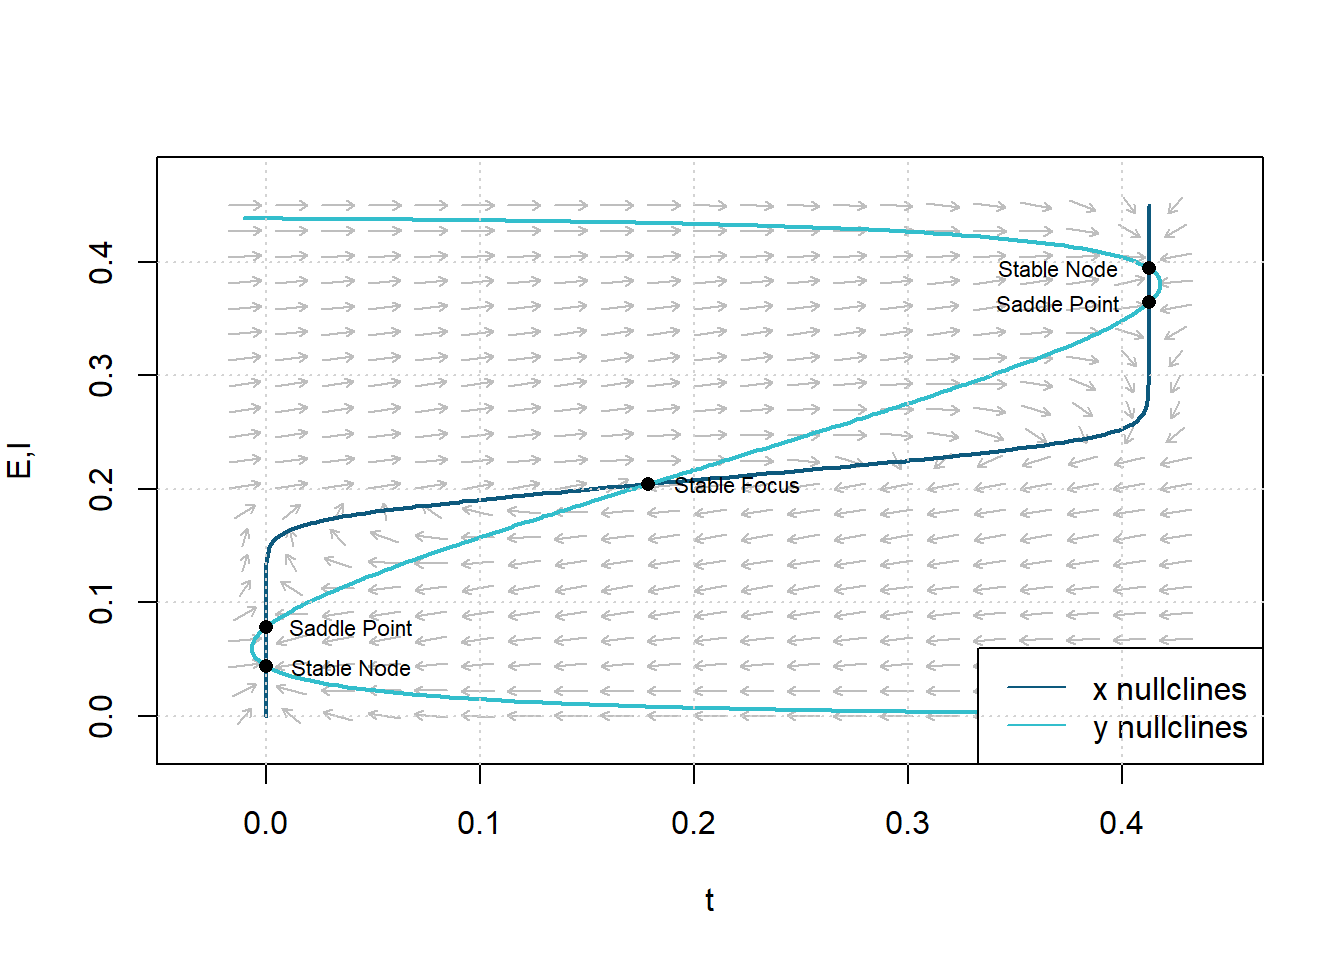 Figure  9: Phase plane and isoclines with parameters chosen to give three stable and two unstable steady states. Parameters: $c_1=13$, $c_2=4$, $c_3=22$, $c_4=2$, $a_e=1.5$, $\theta_e=2.5$, $a_i=6$, $\theta_i=4.3$, $r_e=1$, and $r_i=1$.